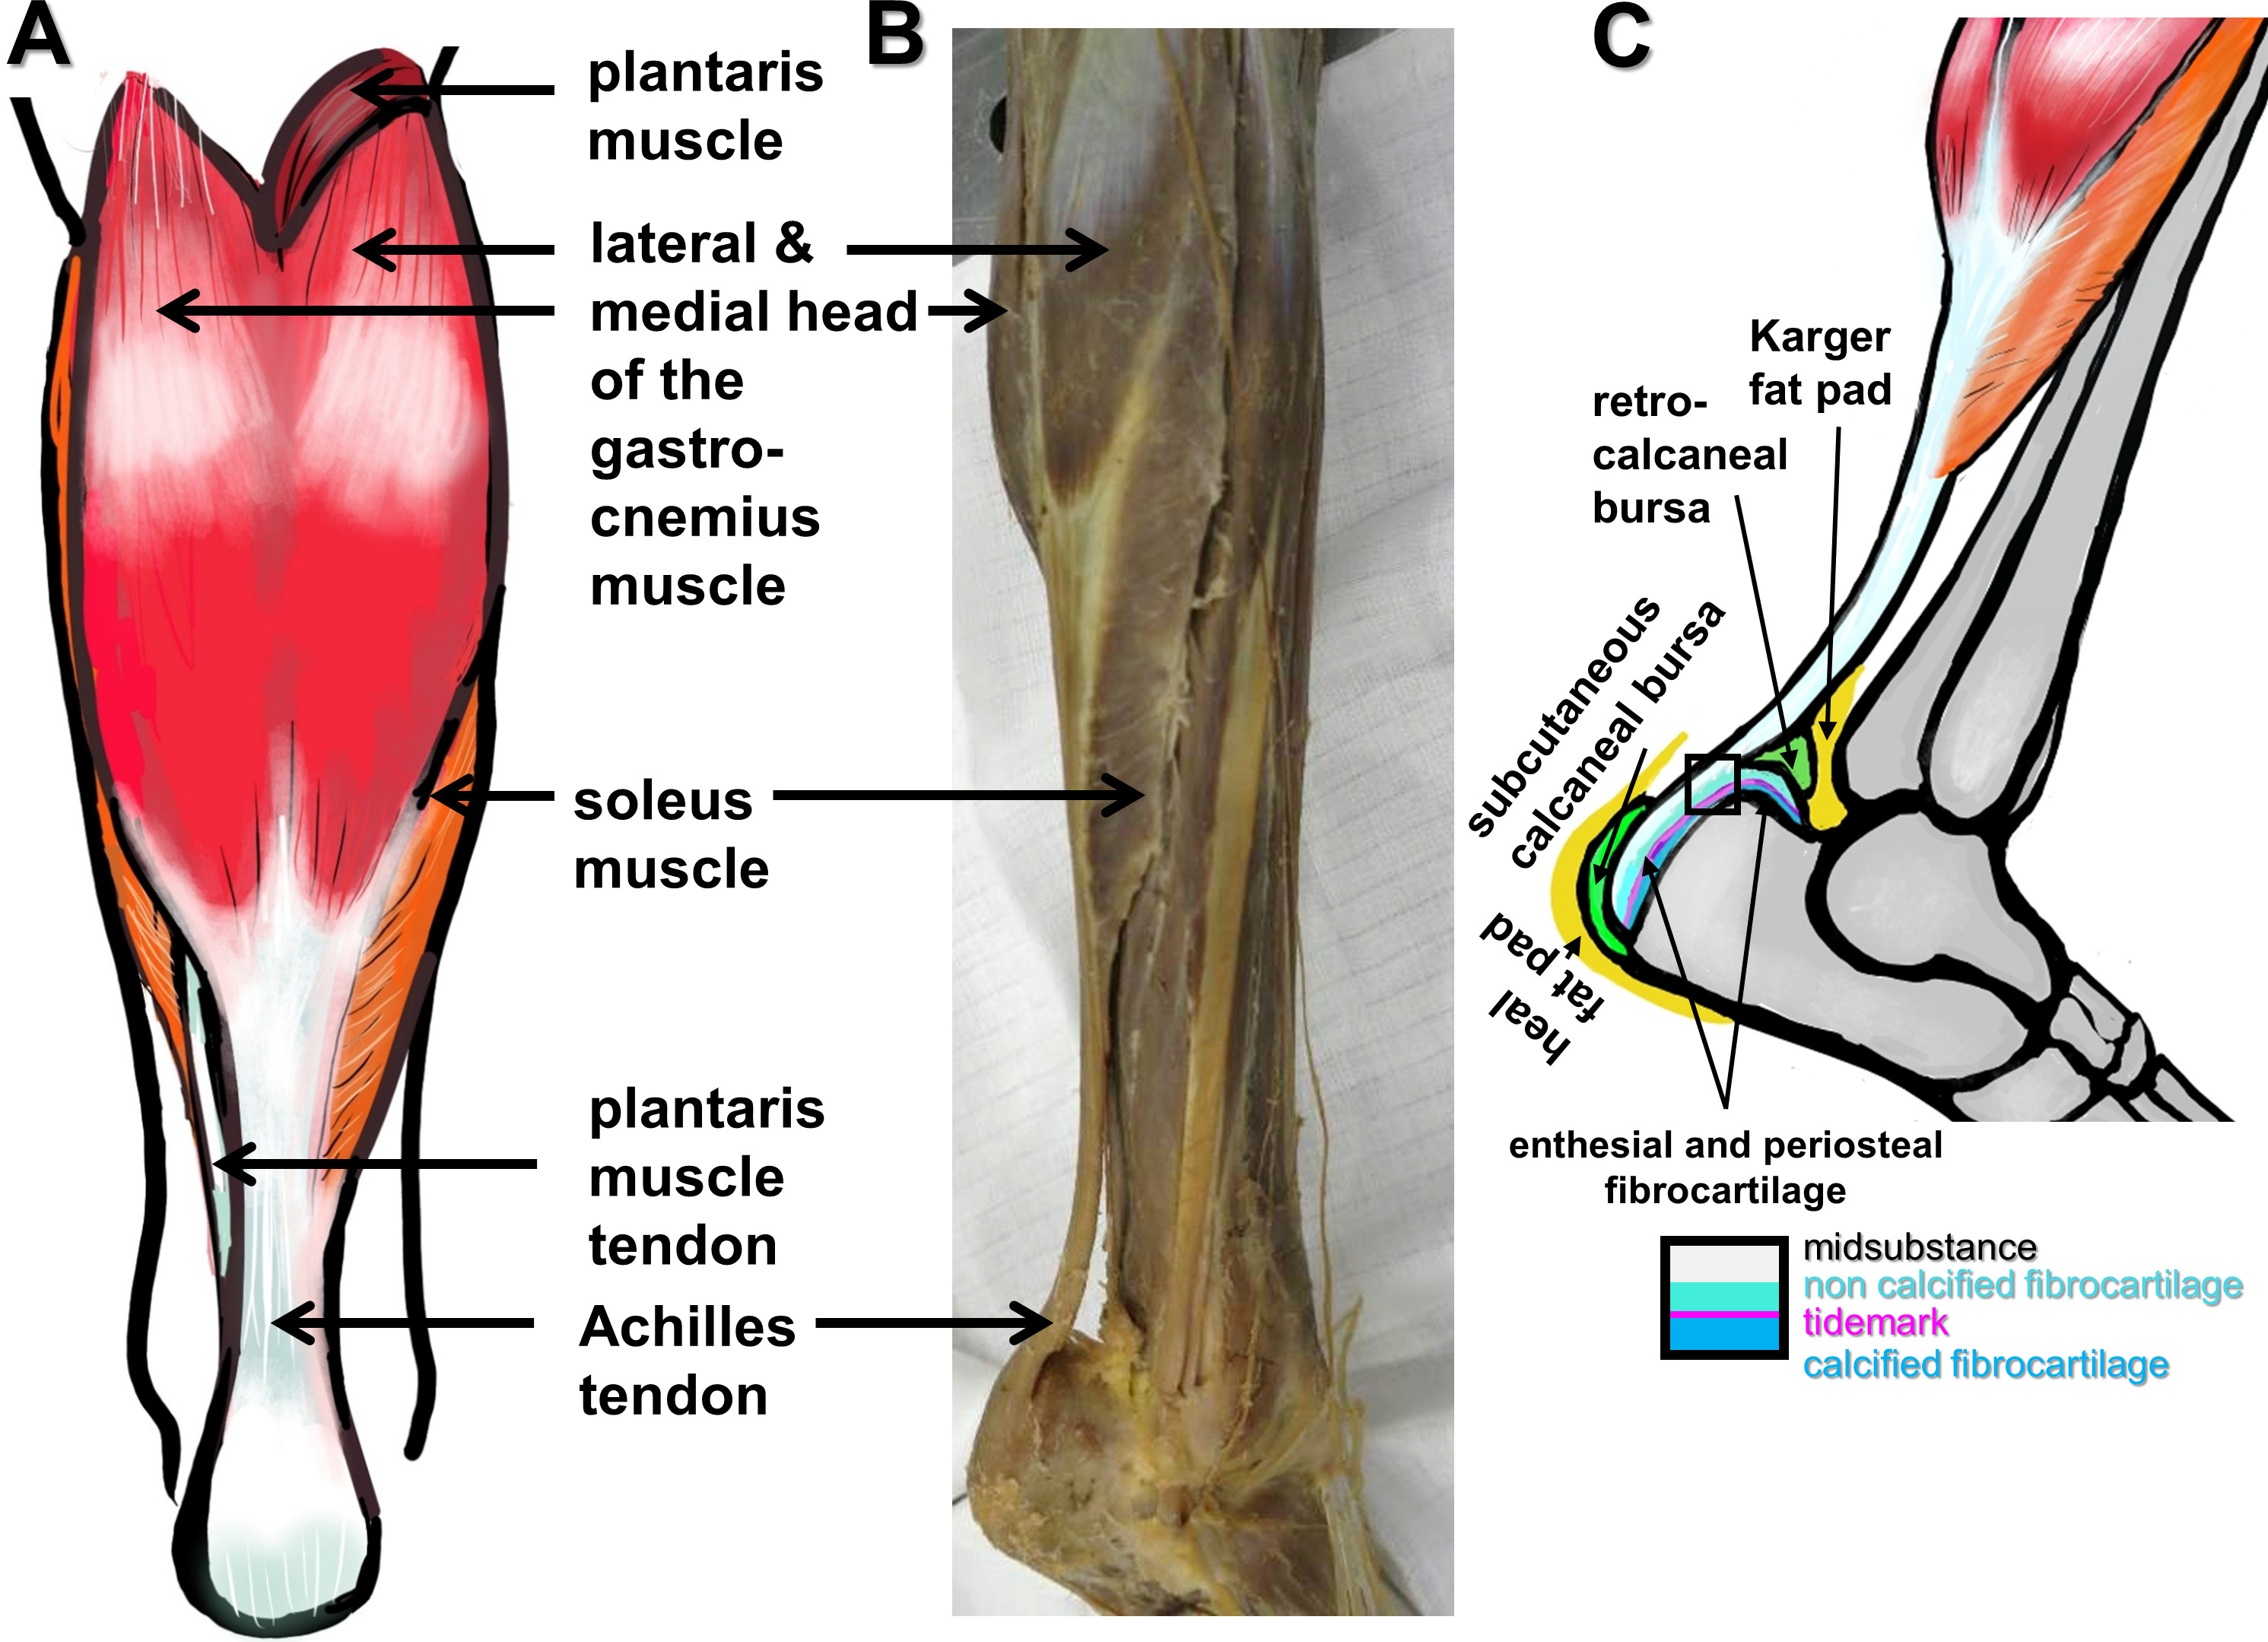 Fig. 1 
            Macroscopical anatomy of the Achilles tendon (AT). a) Scheme of a dorsal view. b) and c) Dorsolateral views: b) dissection photograph; and c) scheme of the AT, bursae, fat pads, and enthesis zones (inset). a) and c) The images were created by G. G. Schulze-Tanzil using Krita 4.1.7 (Krita Foundation, The Netherlands).
          